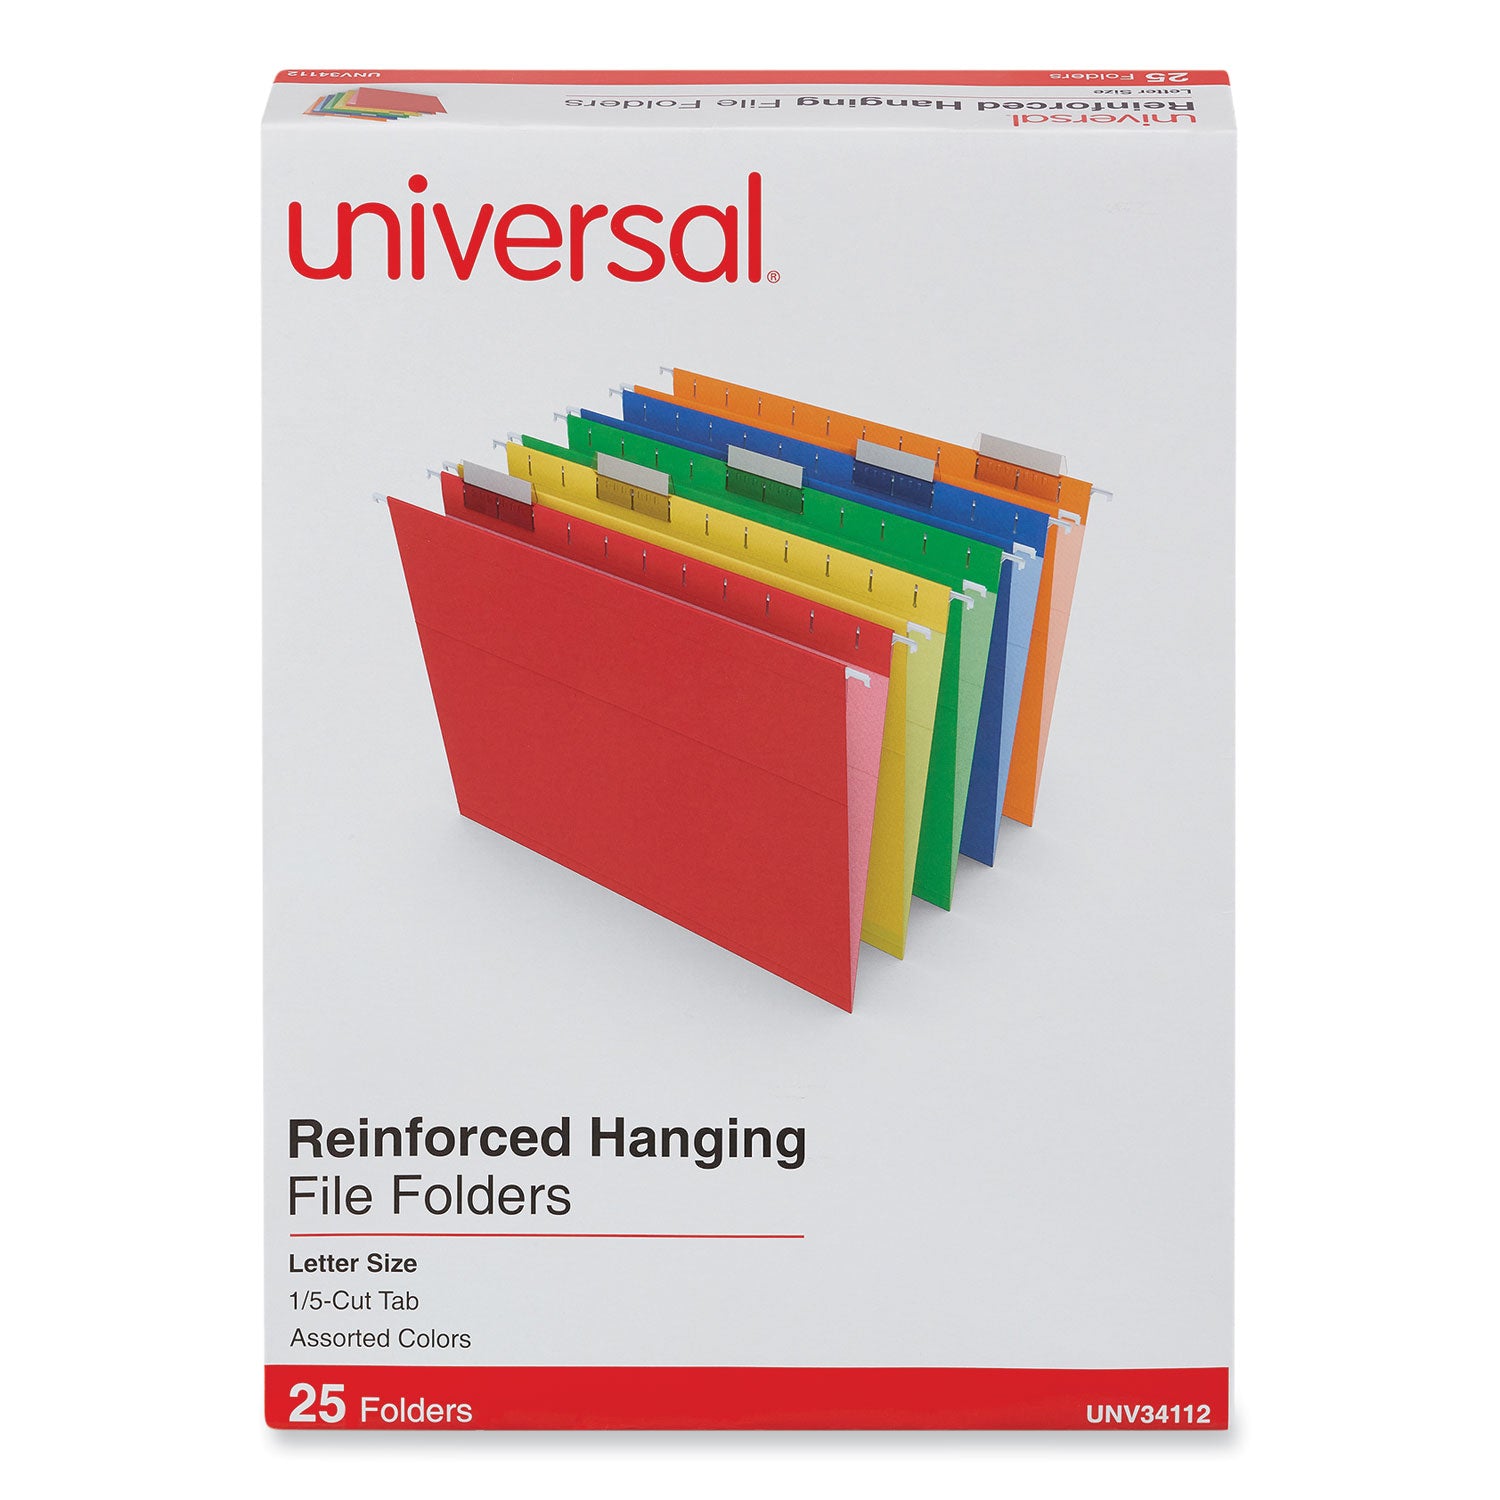 deluxe-reinforced-recycled-hanging-file-folders-letter-size-1-5-cut-tabs-assorted-25-box_unv34112 - 1